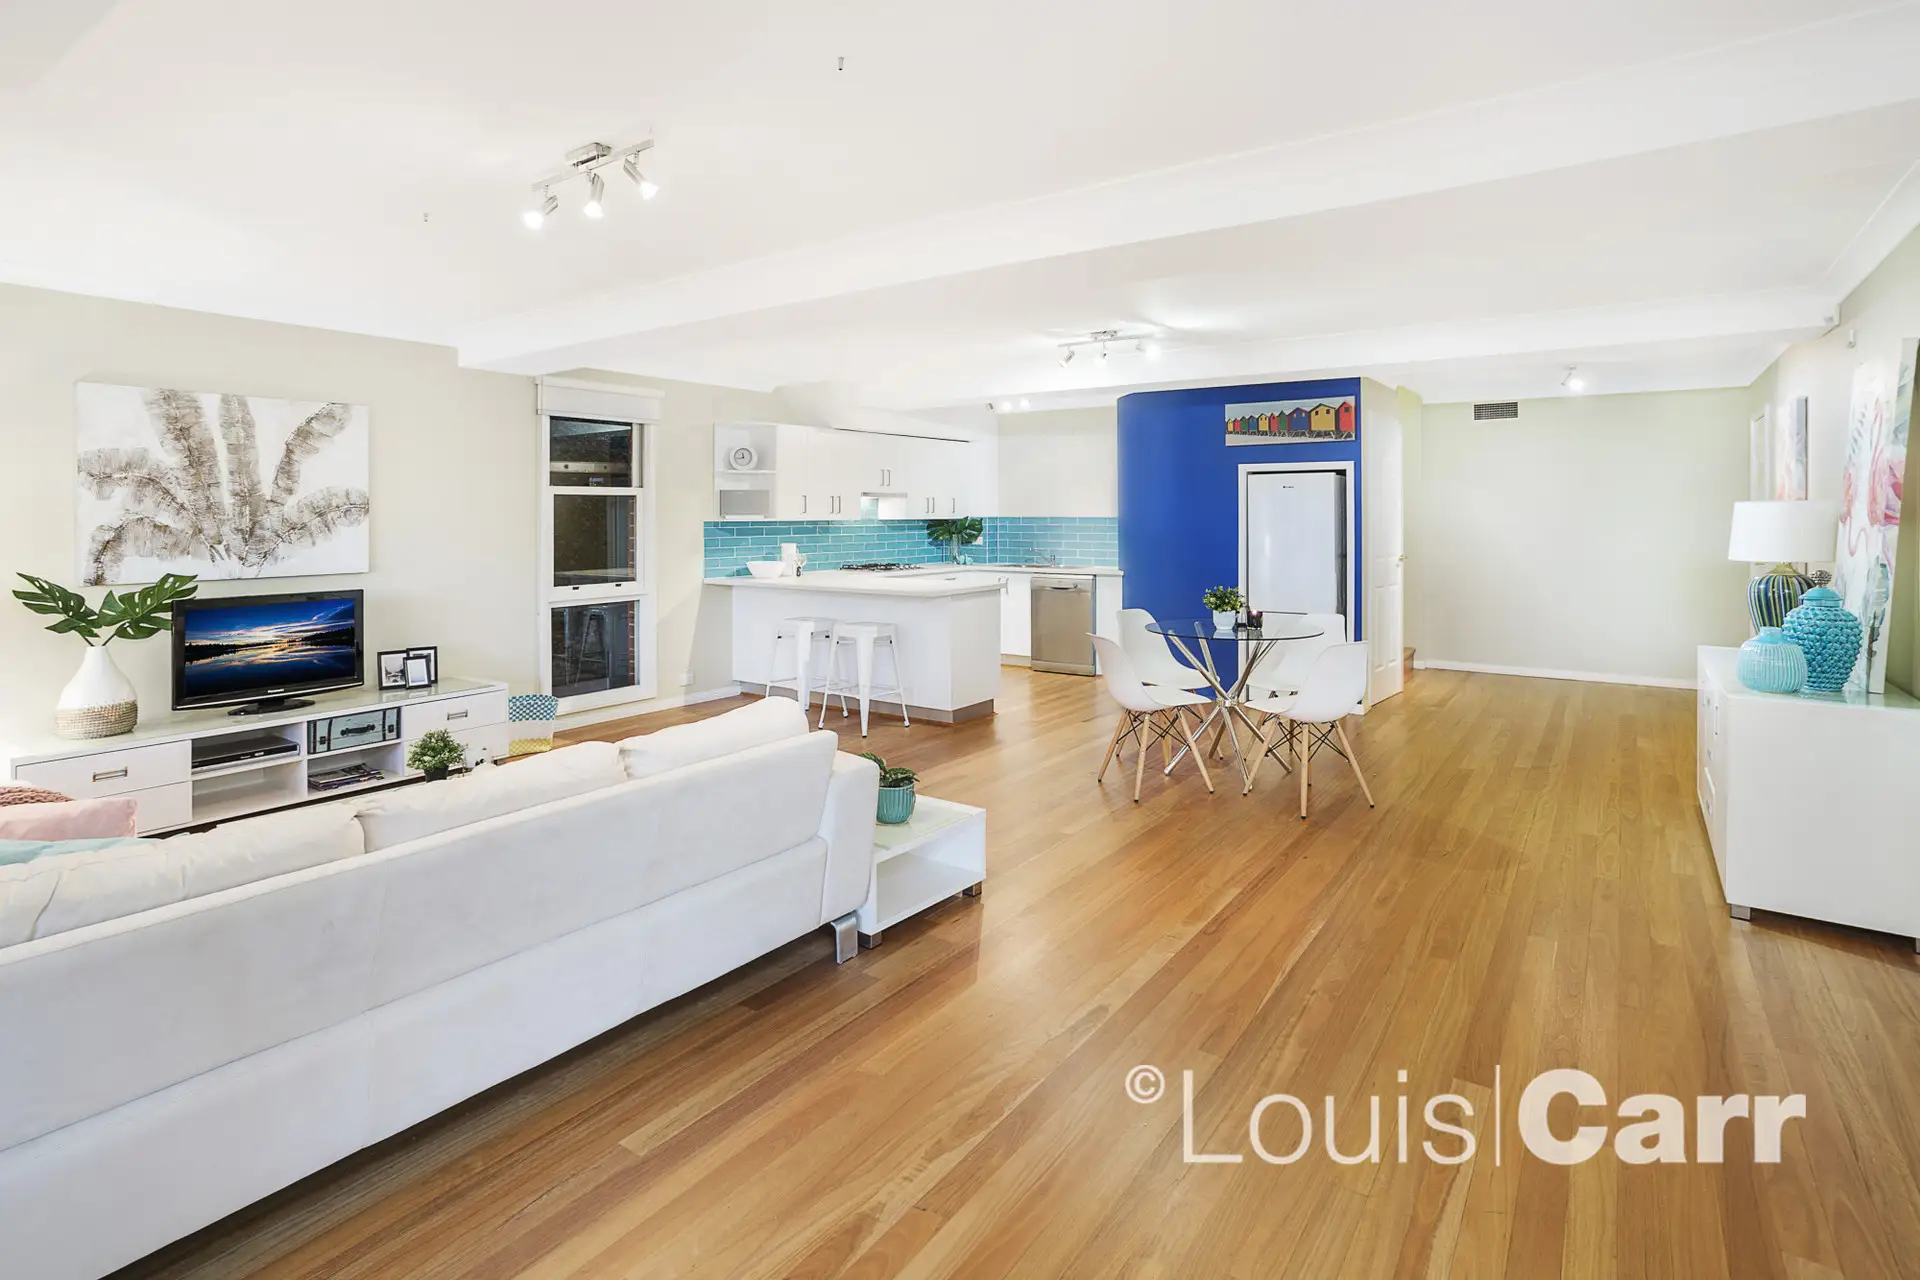 Photo #7: 21 Glenhope Road, West Pennant Hills - Sold by Louis Carr Real Estate